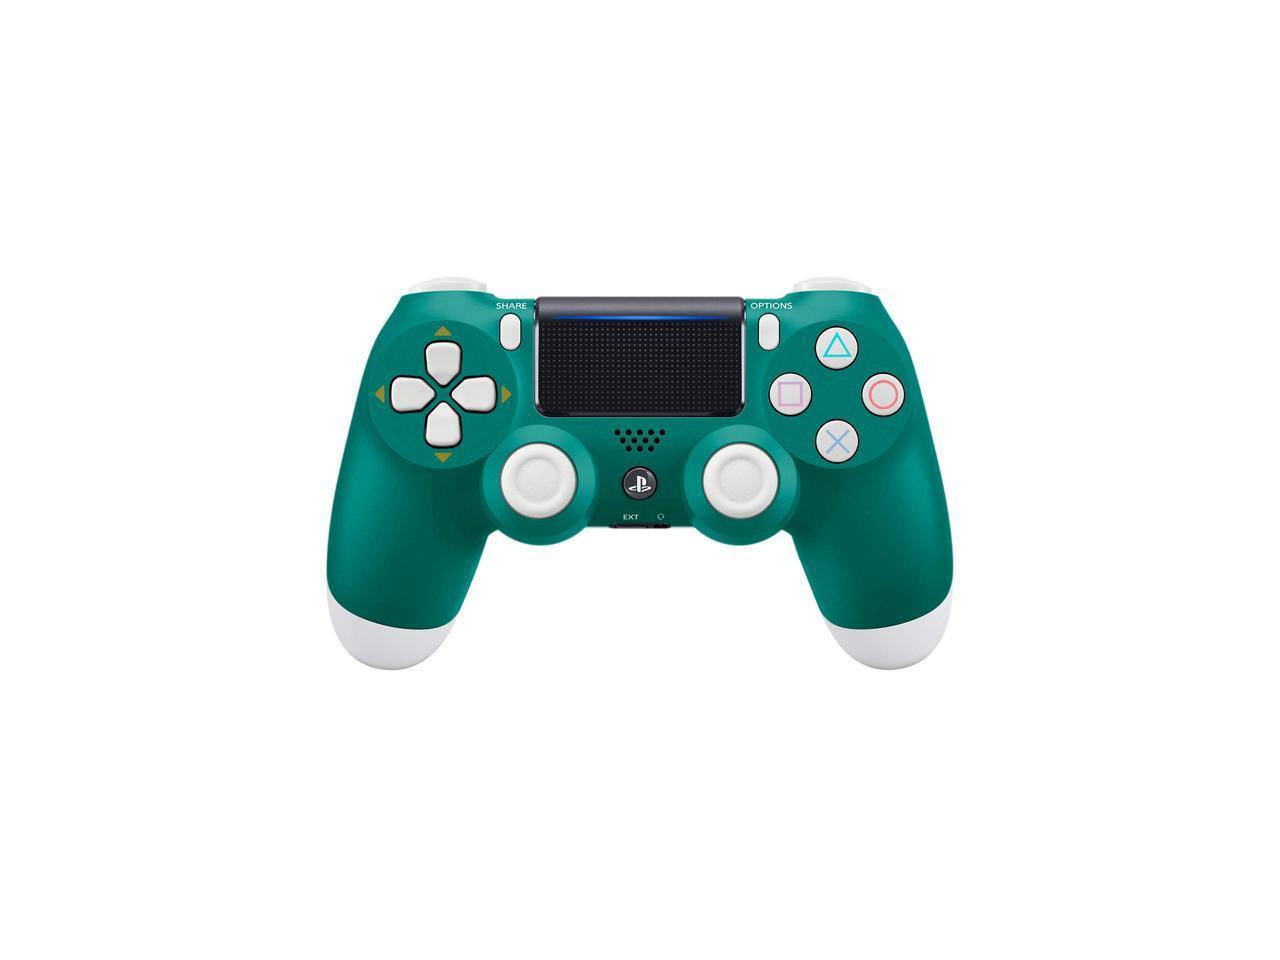 OEM DualShock 4 Wireless Controller for Sony PlayStation 4 - Alpine Green (CUH-ZCT2)